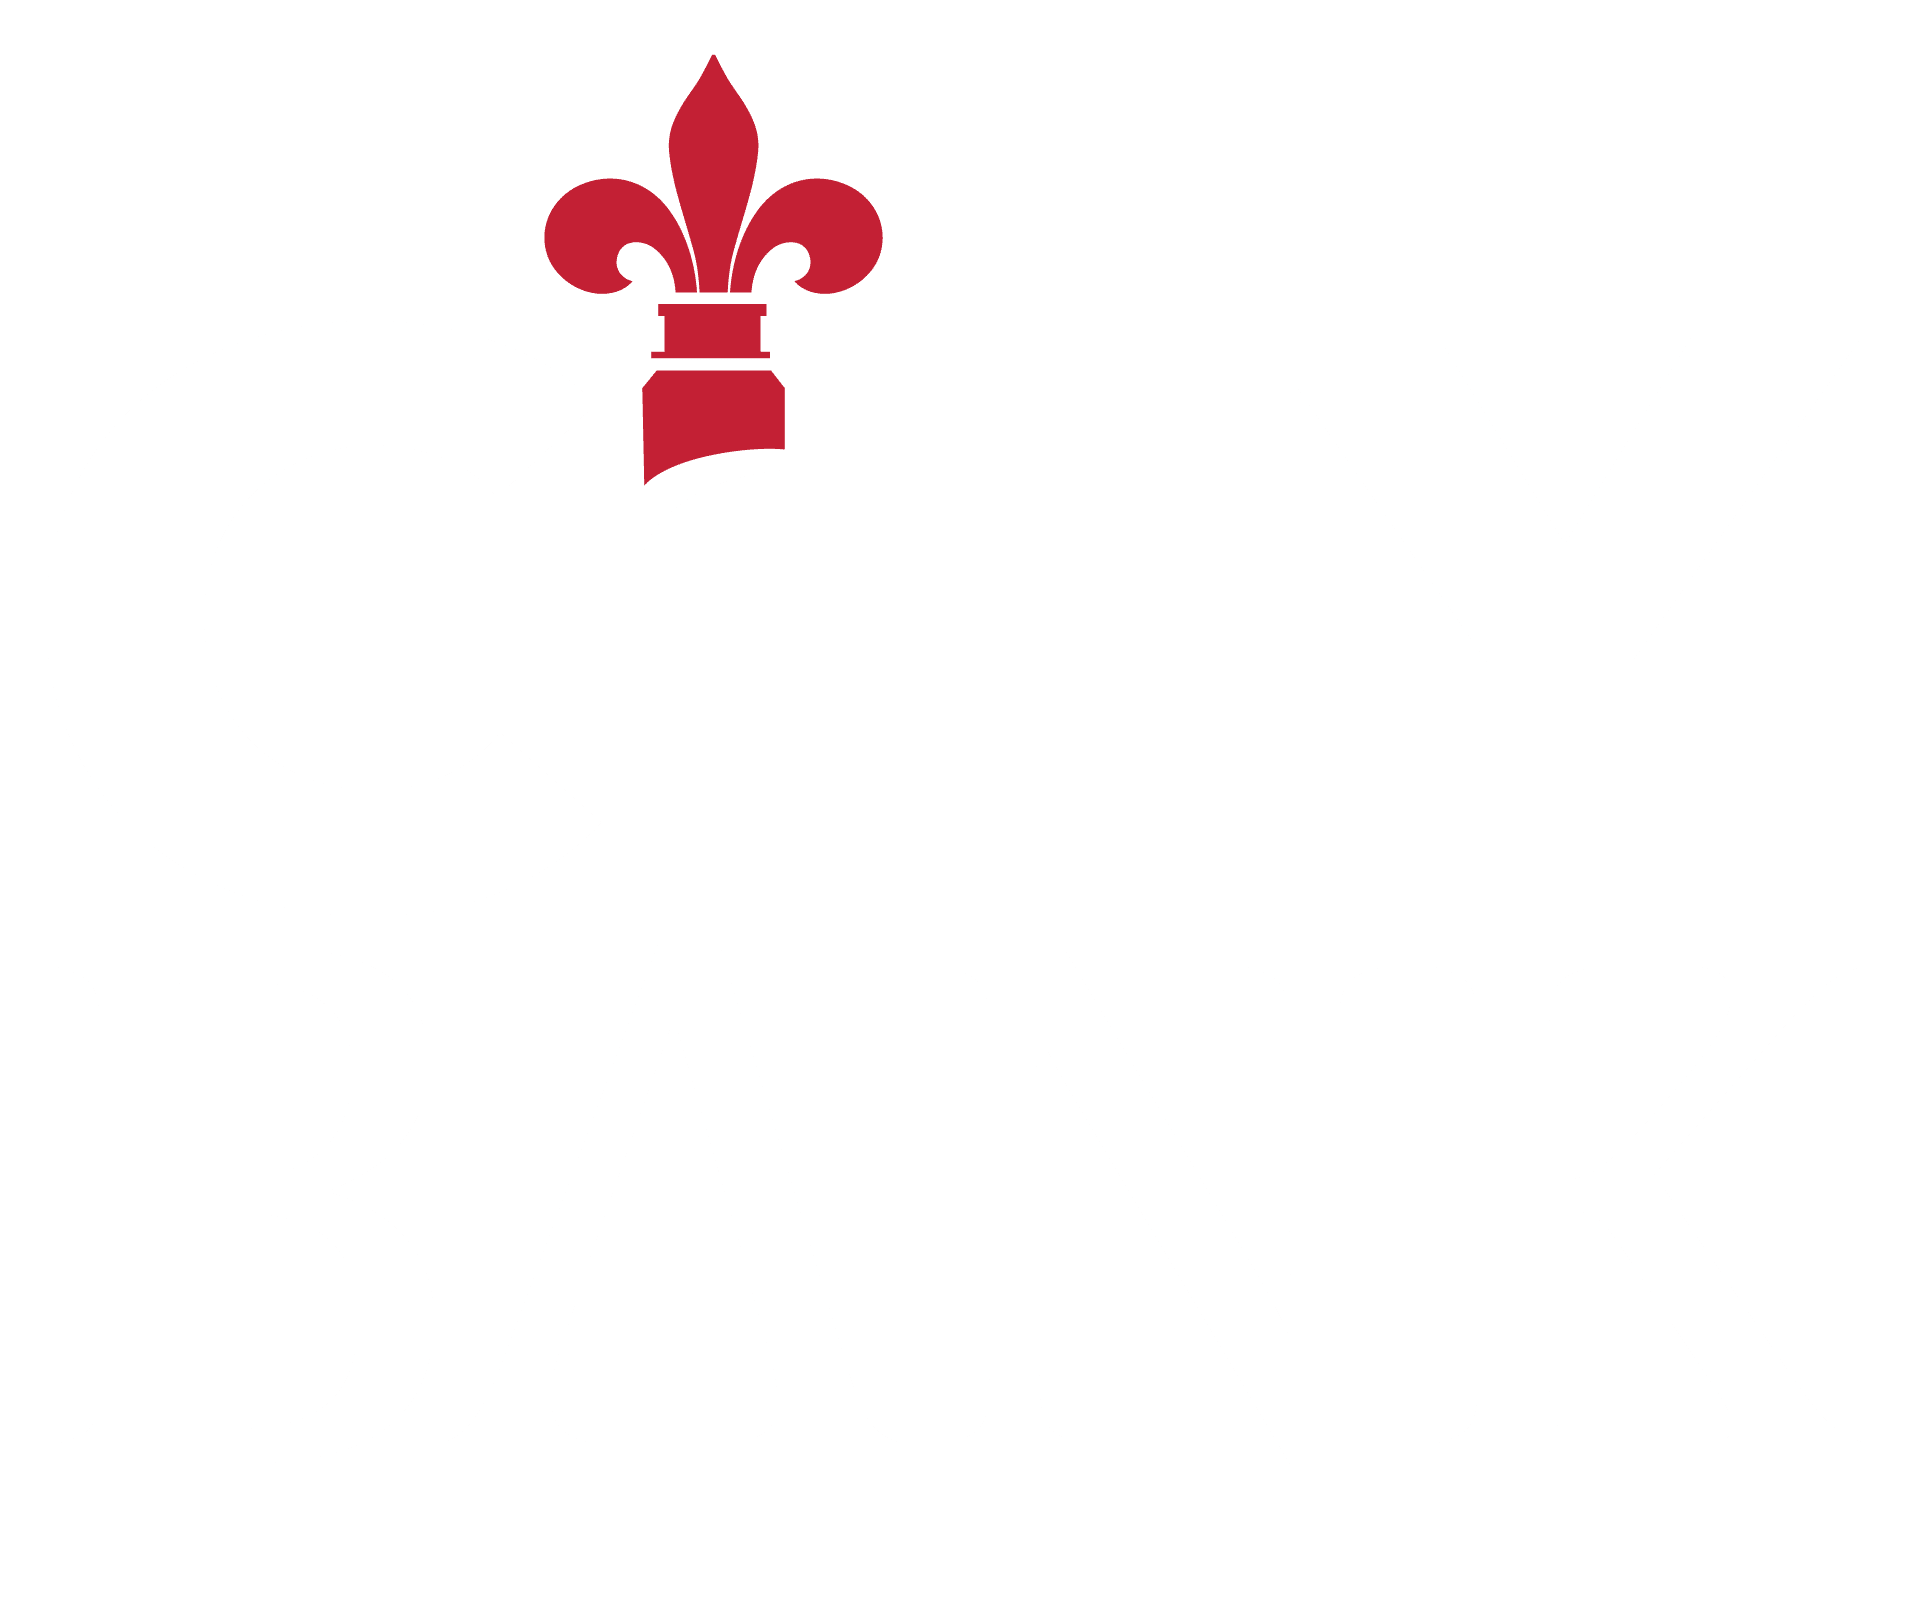 Bank Officers - Mobile Banking - My City Bank - Natchitoches, La